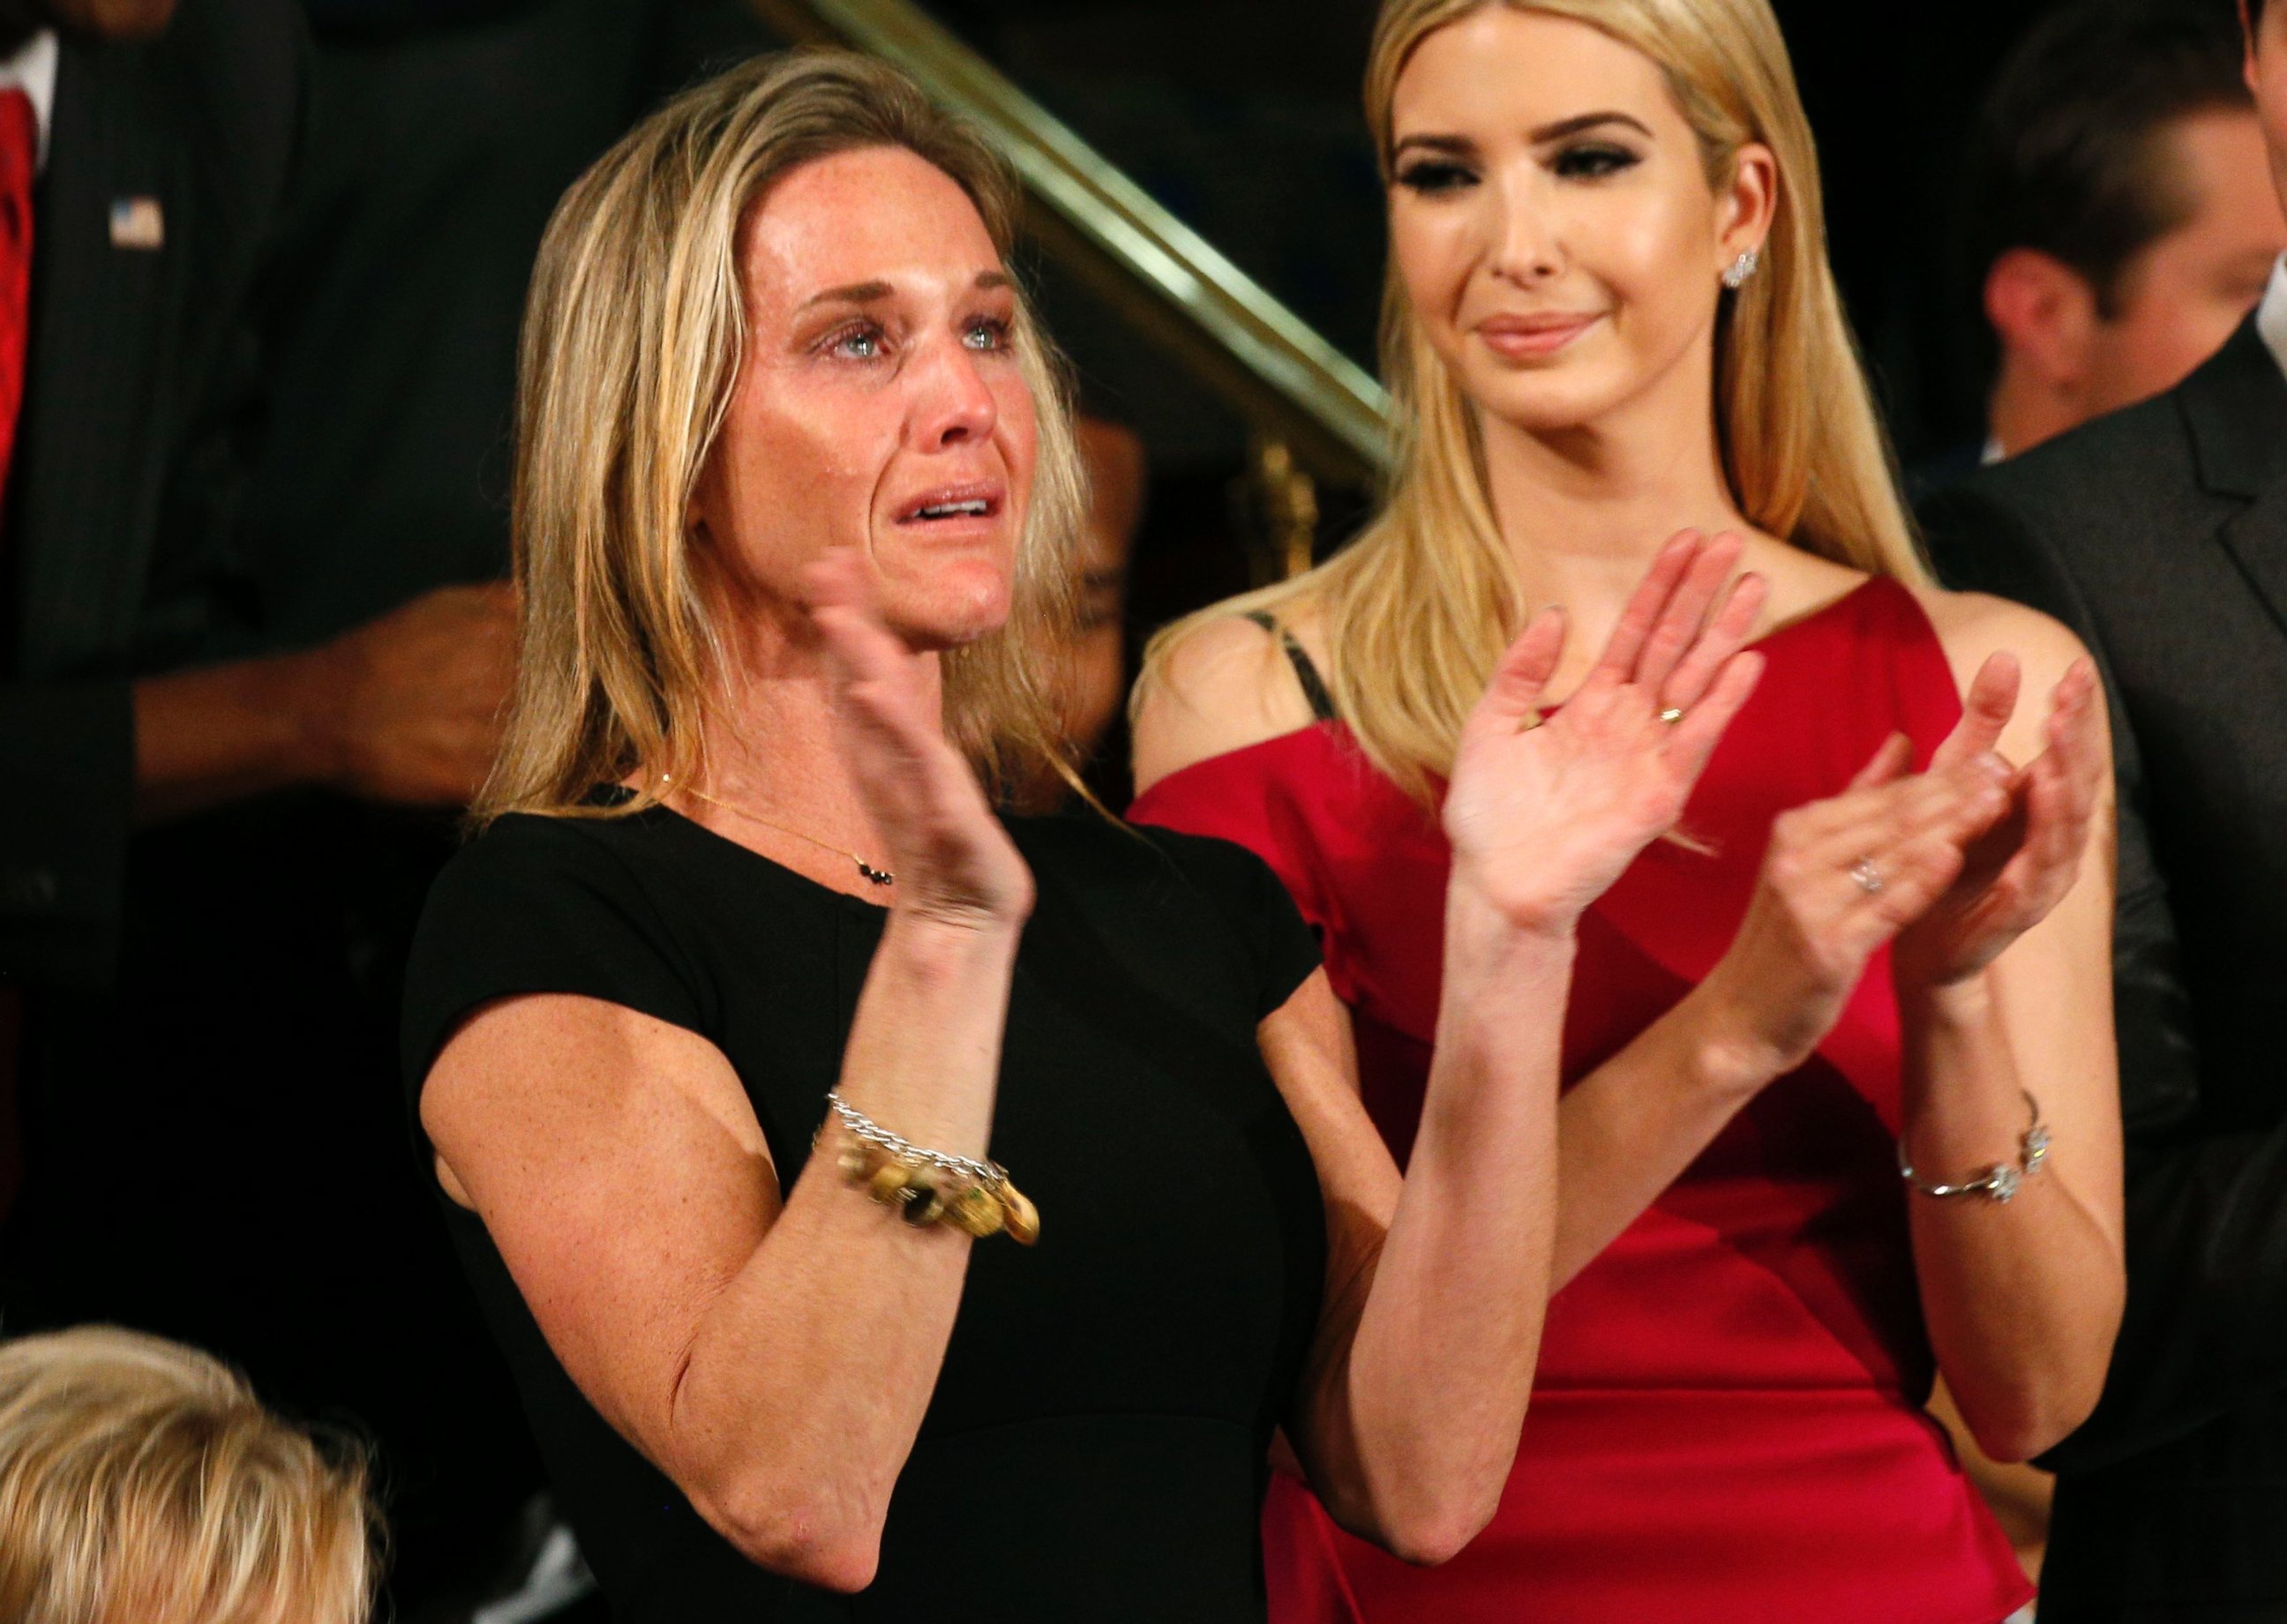 PHOTO: Carryn Owens, widow of Senior Chief Petty Officer William "Ryan" Owens, applauds after being mentioned by President Trump during his address to a joint session of the U.S. Congress on Feb. 28, 2017 in Washington, DC.